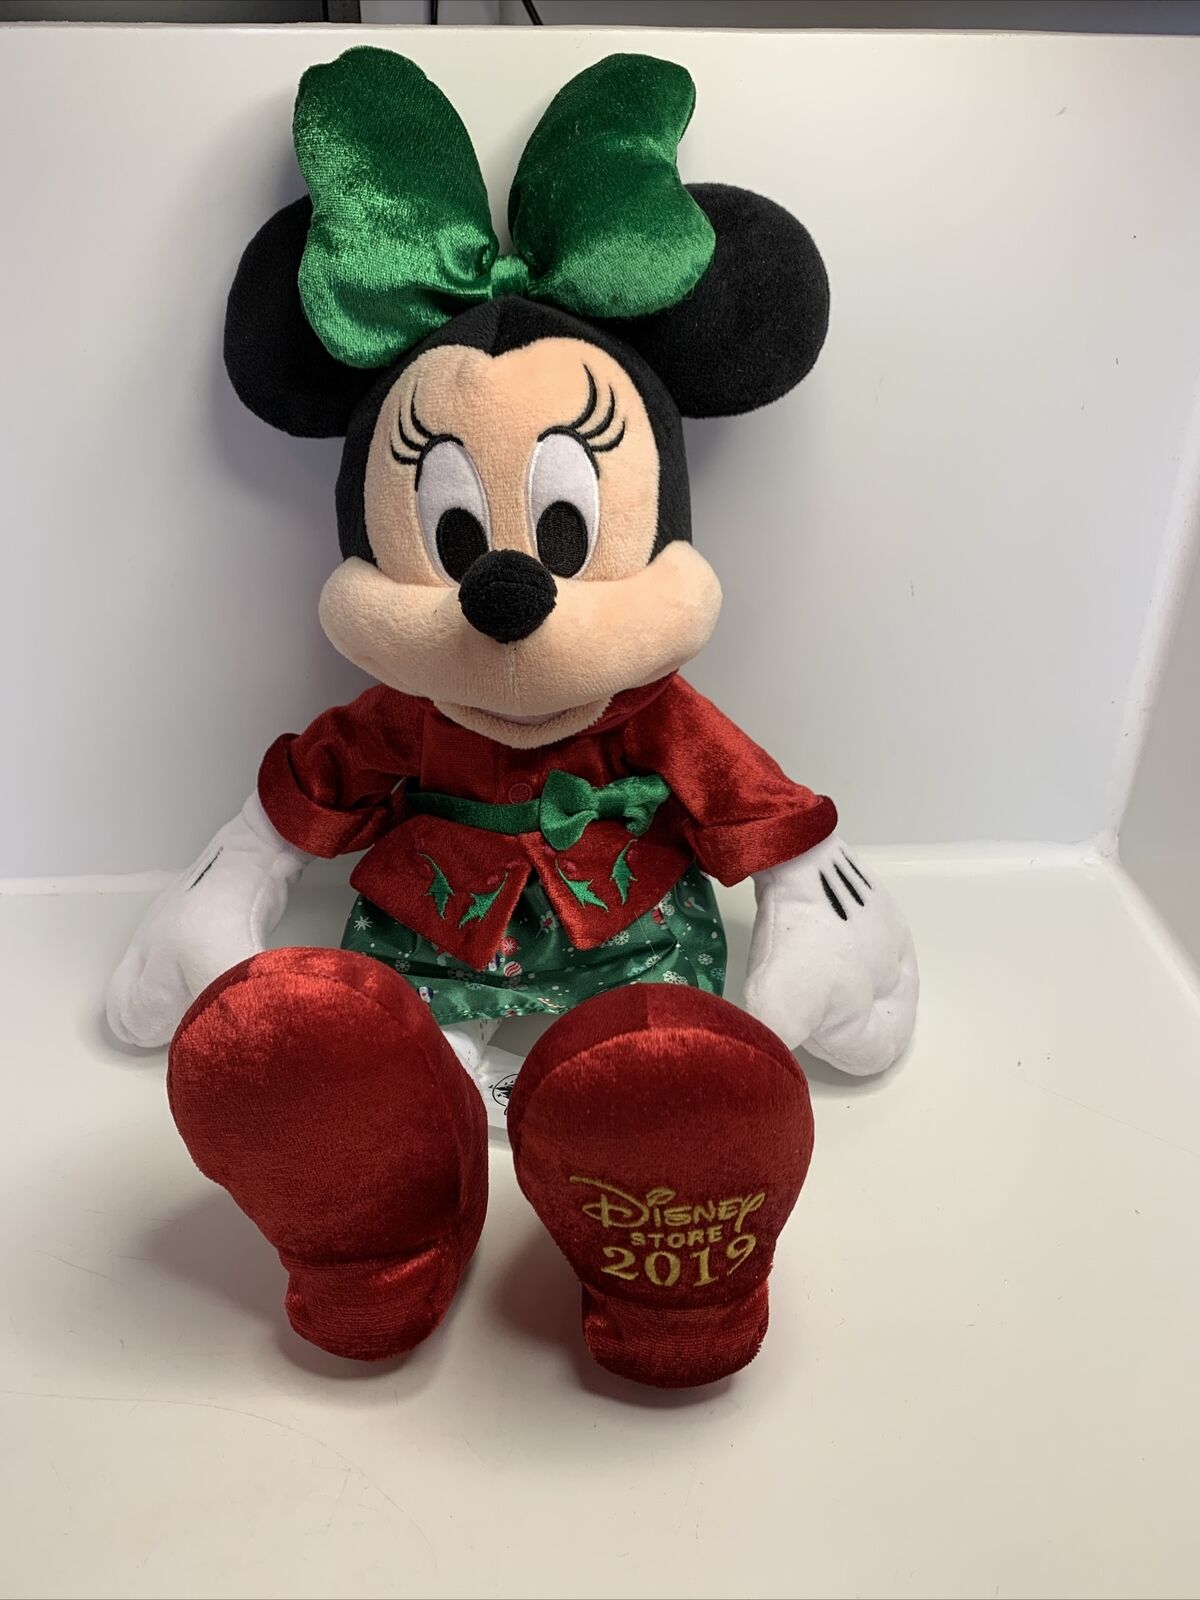 BNWT Shop Disney Store Dated 2019 Minnie Mouse Holiday Cheer Soft Plush Toy 17